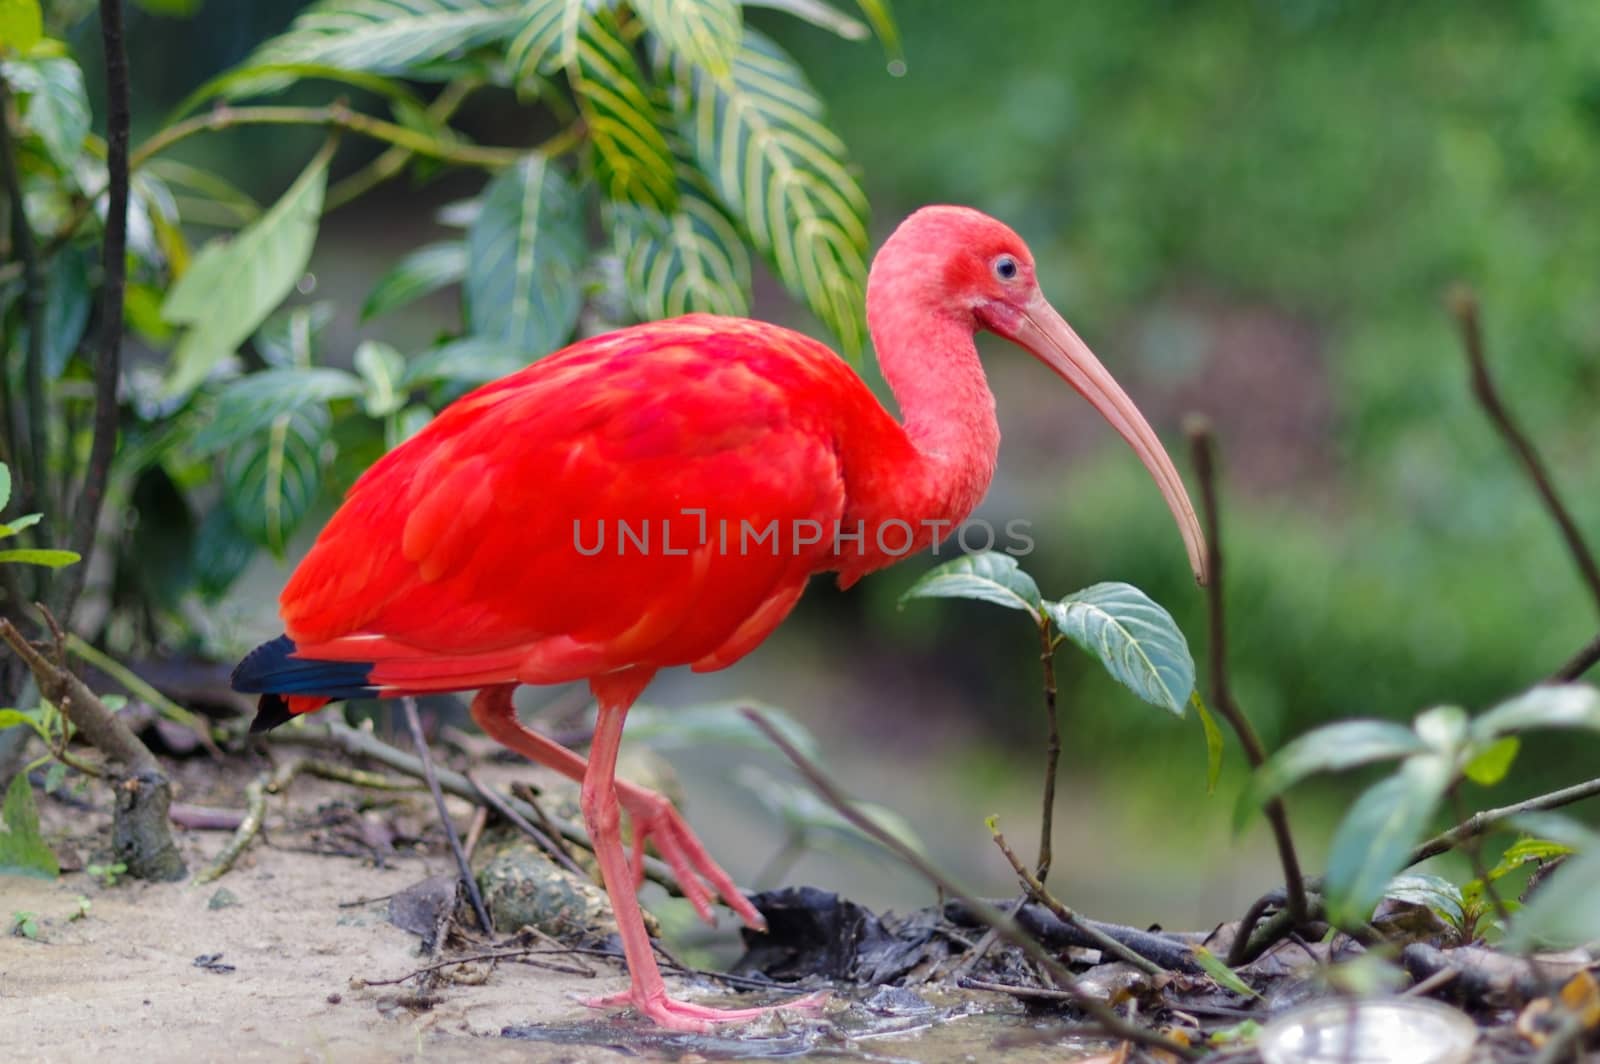 red Scarlet ibis in Bird Park, Kuala Lumpur, Malaysia KL by evolutionnow